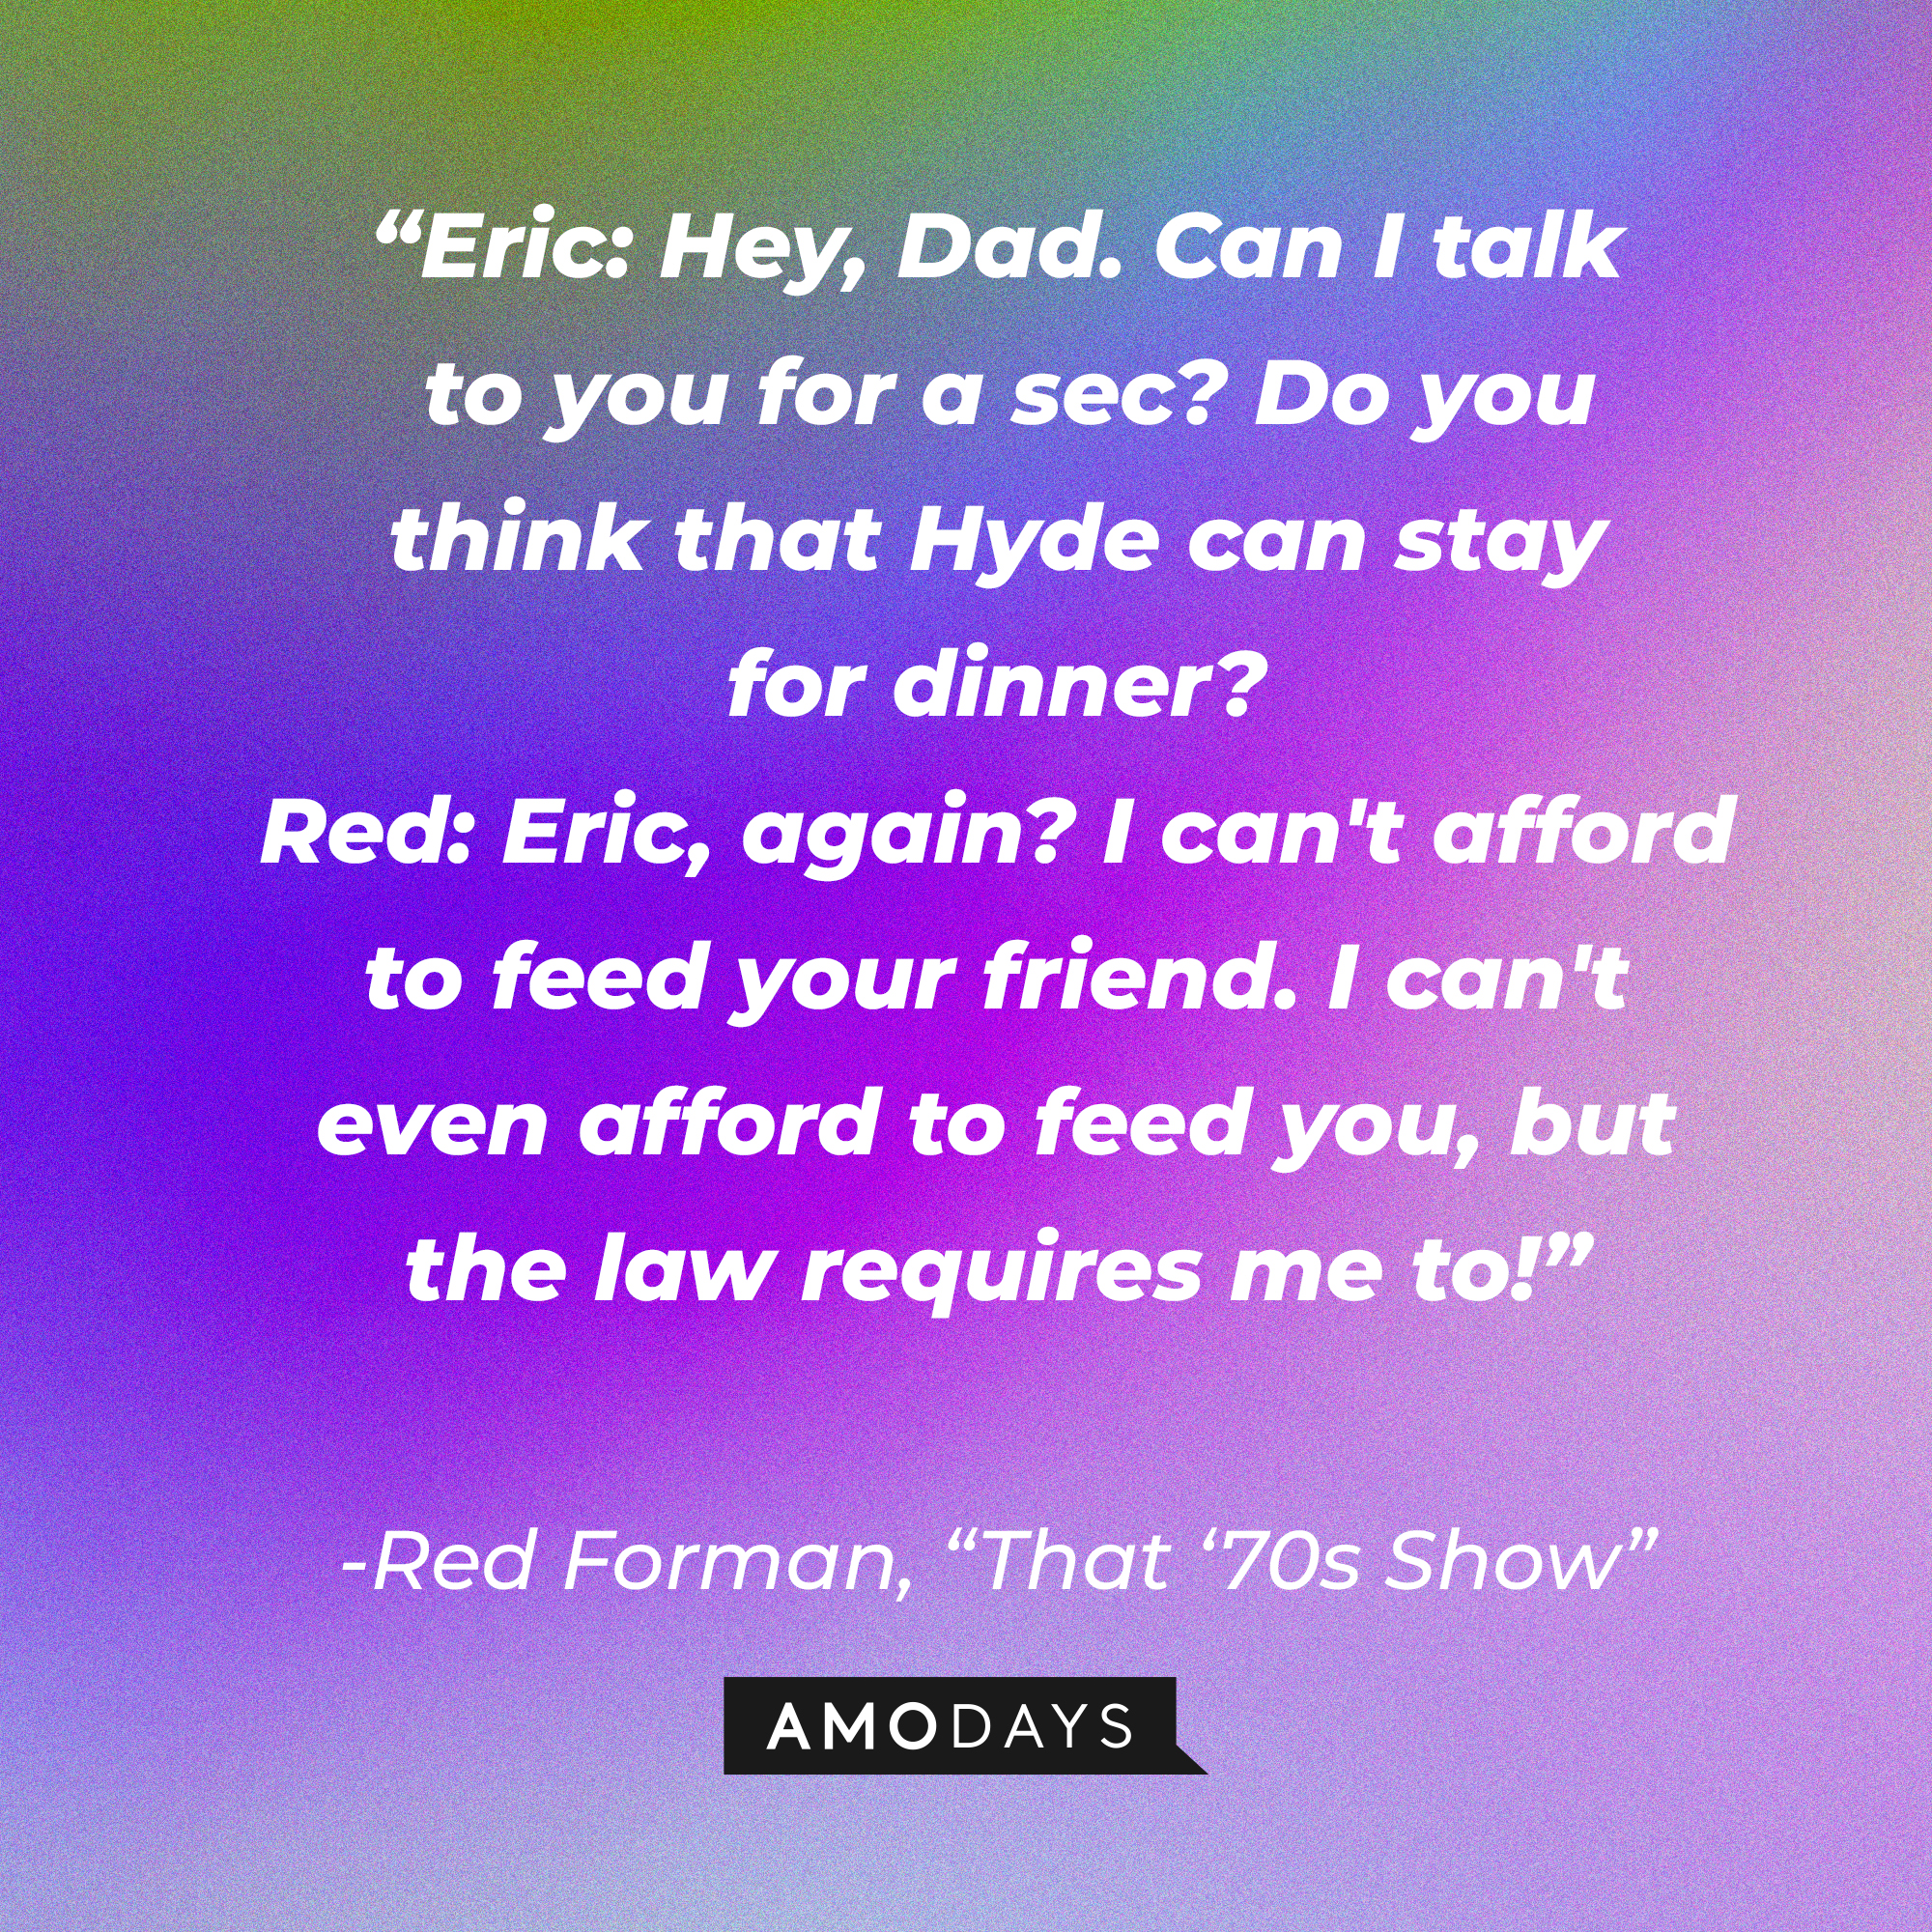 Red Forman's quote from "That '70s Show:" “Eric: Hey, Dad. Can I talk to you for a sec? Do you think that Hyde can stay for dinner? Red: Eric, again? I can't afford to feed your friend. I can't even afford to feed you, but the law requires me to!”| Source: AmoDays